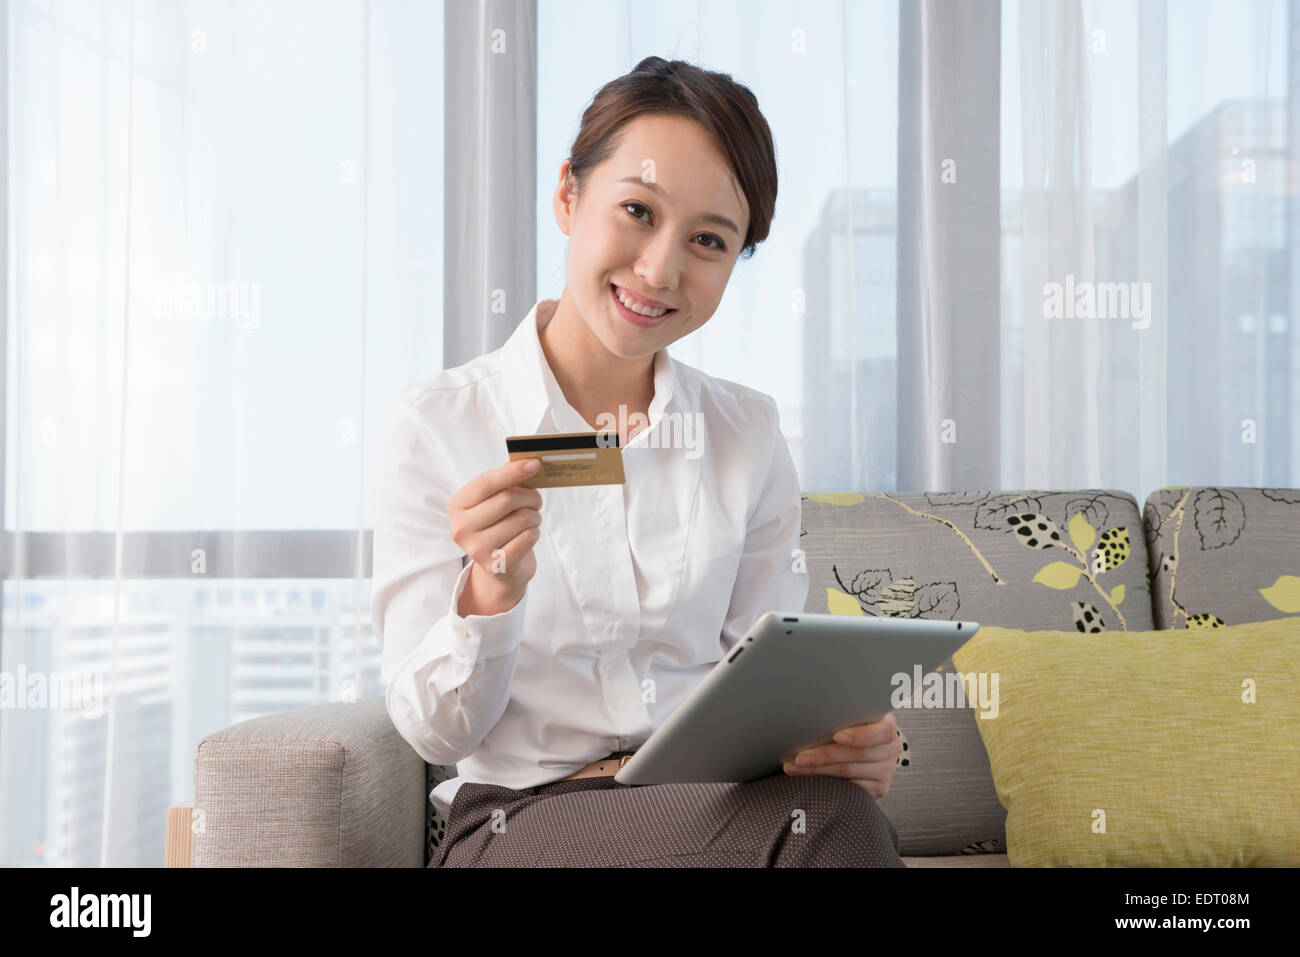 Young woman shopping online Stock Photo